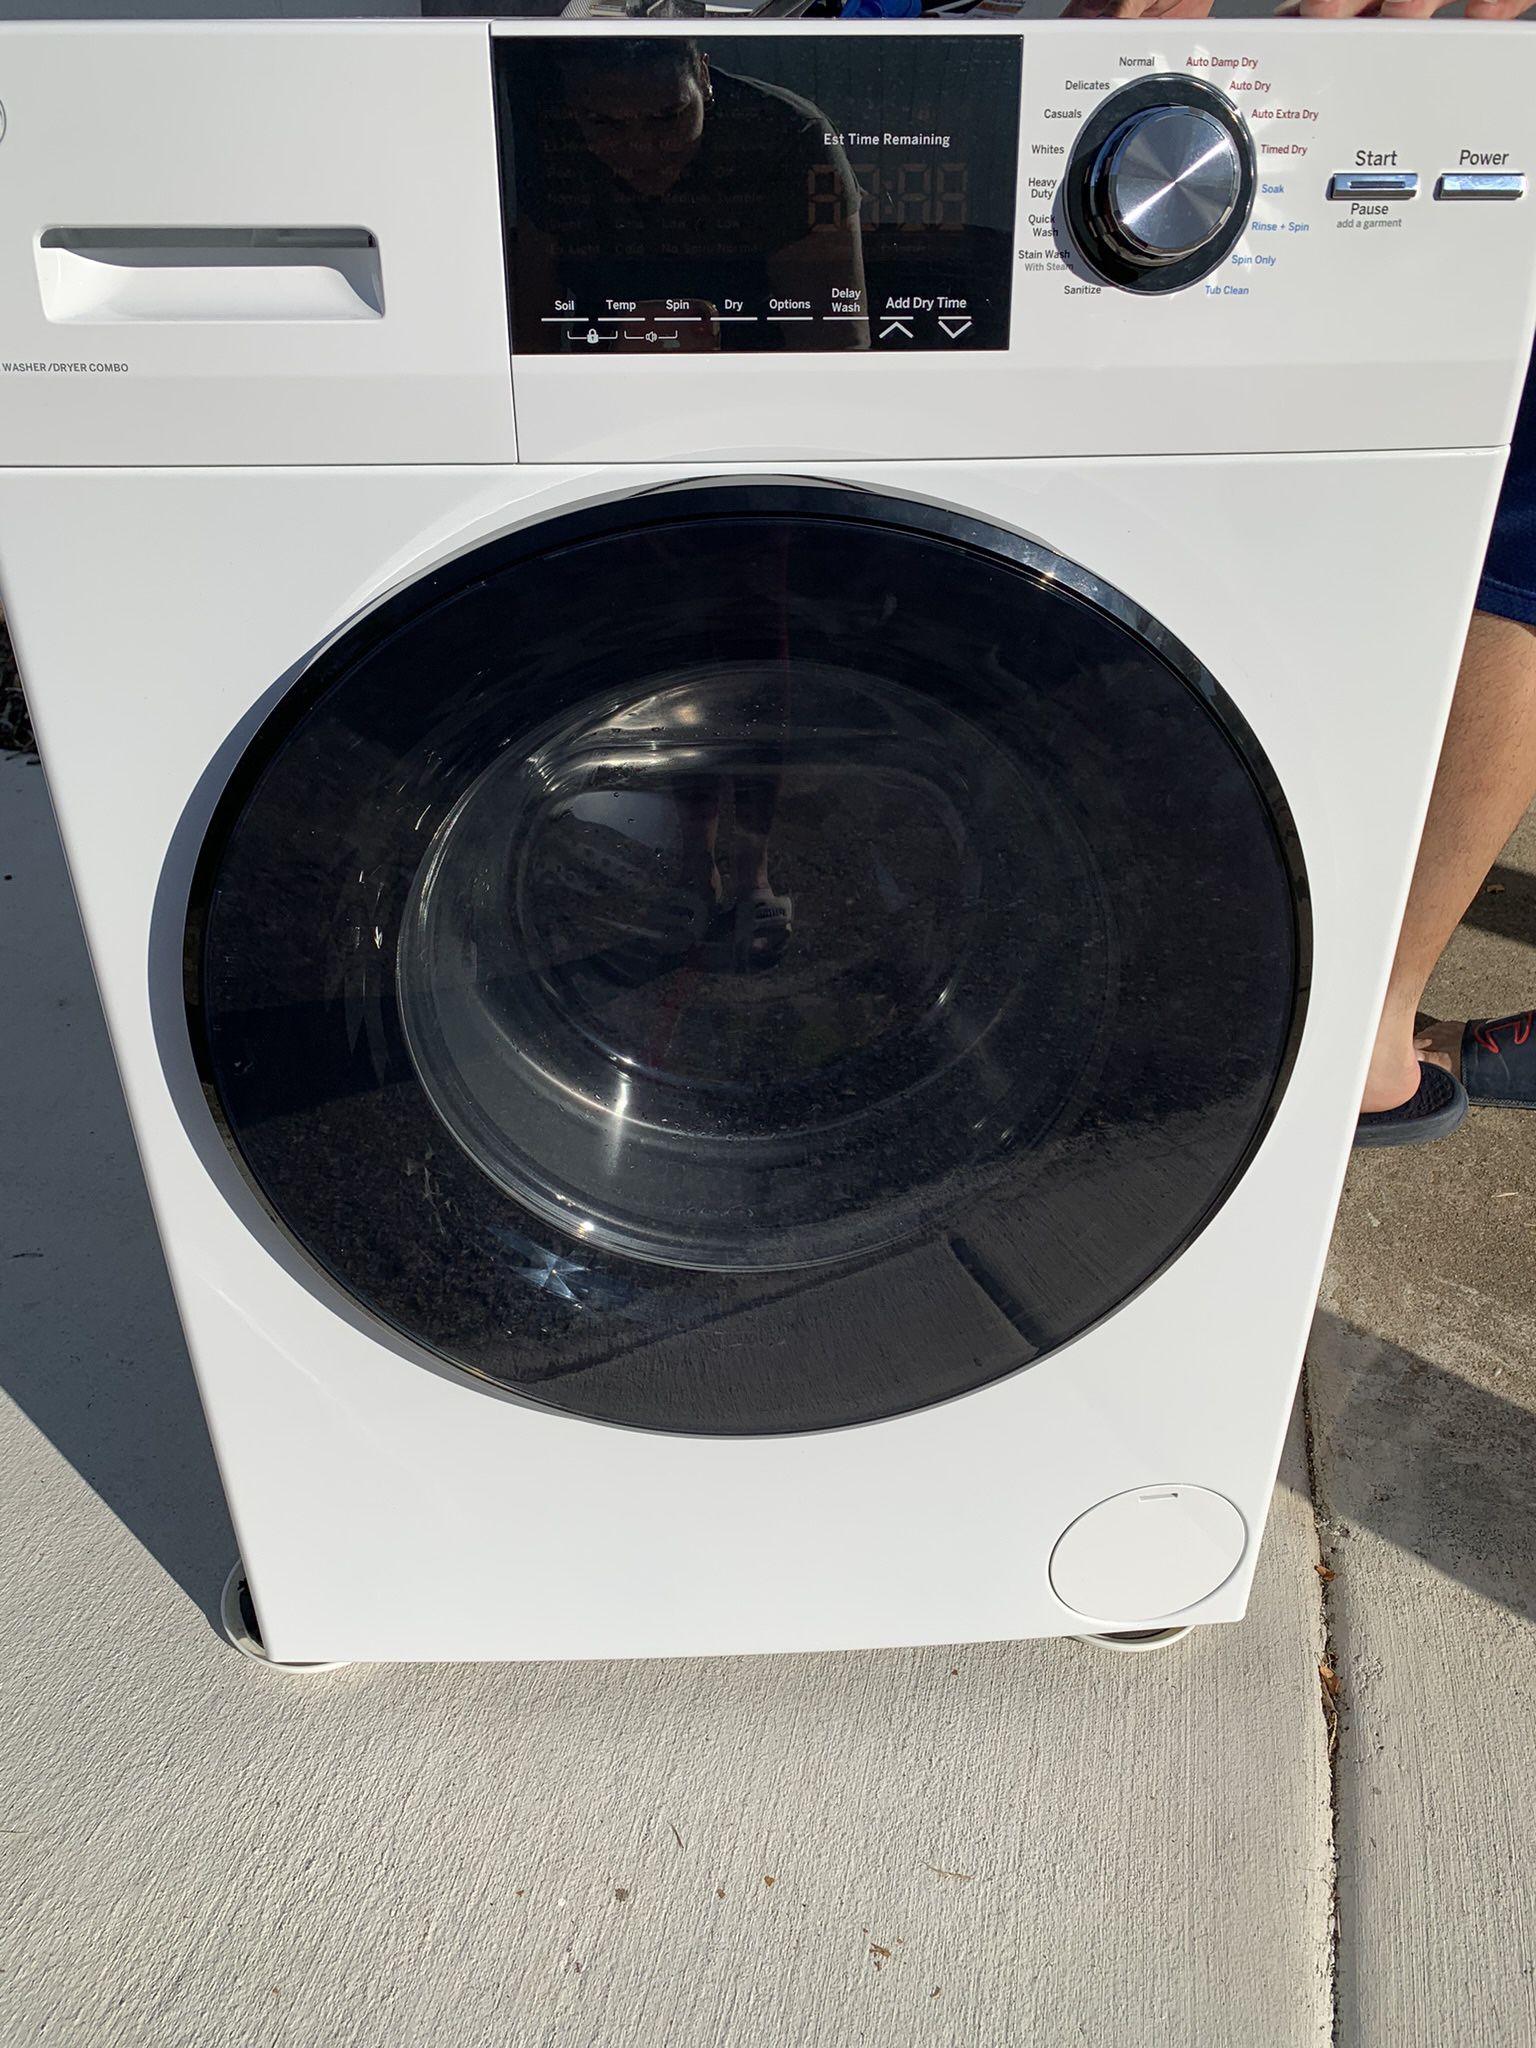 All In One Ventless Washer/dryer 